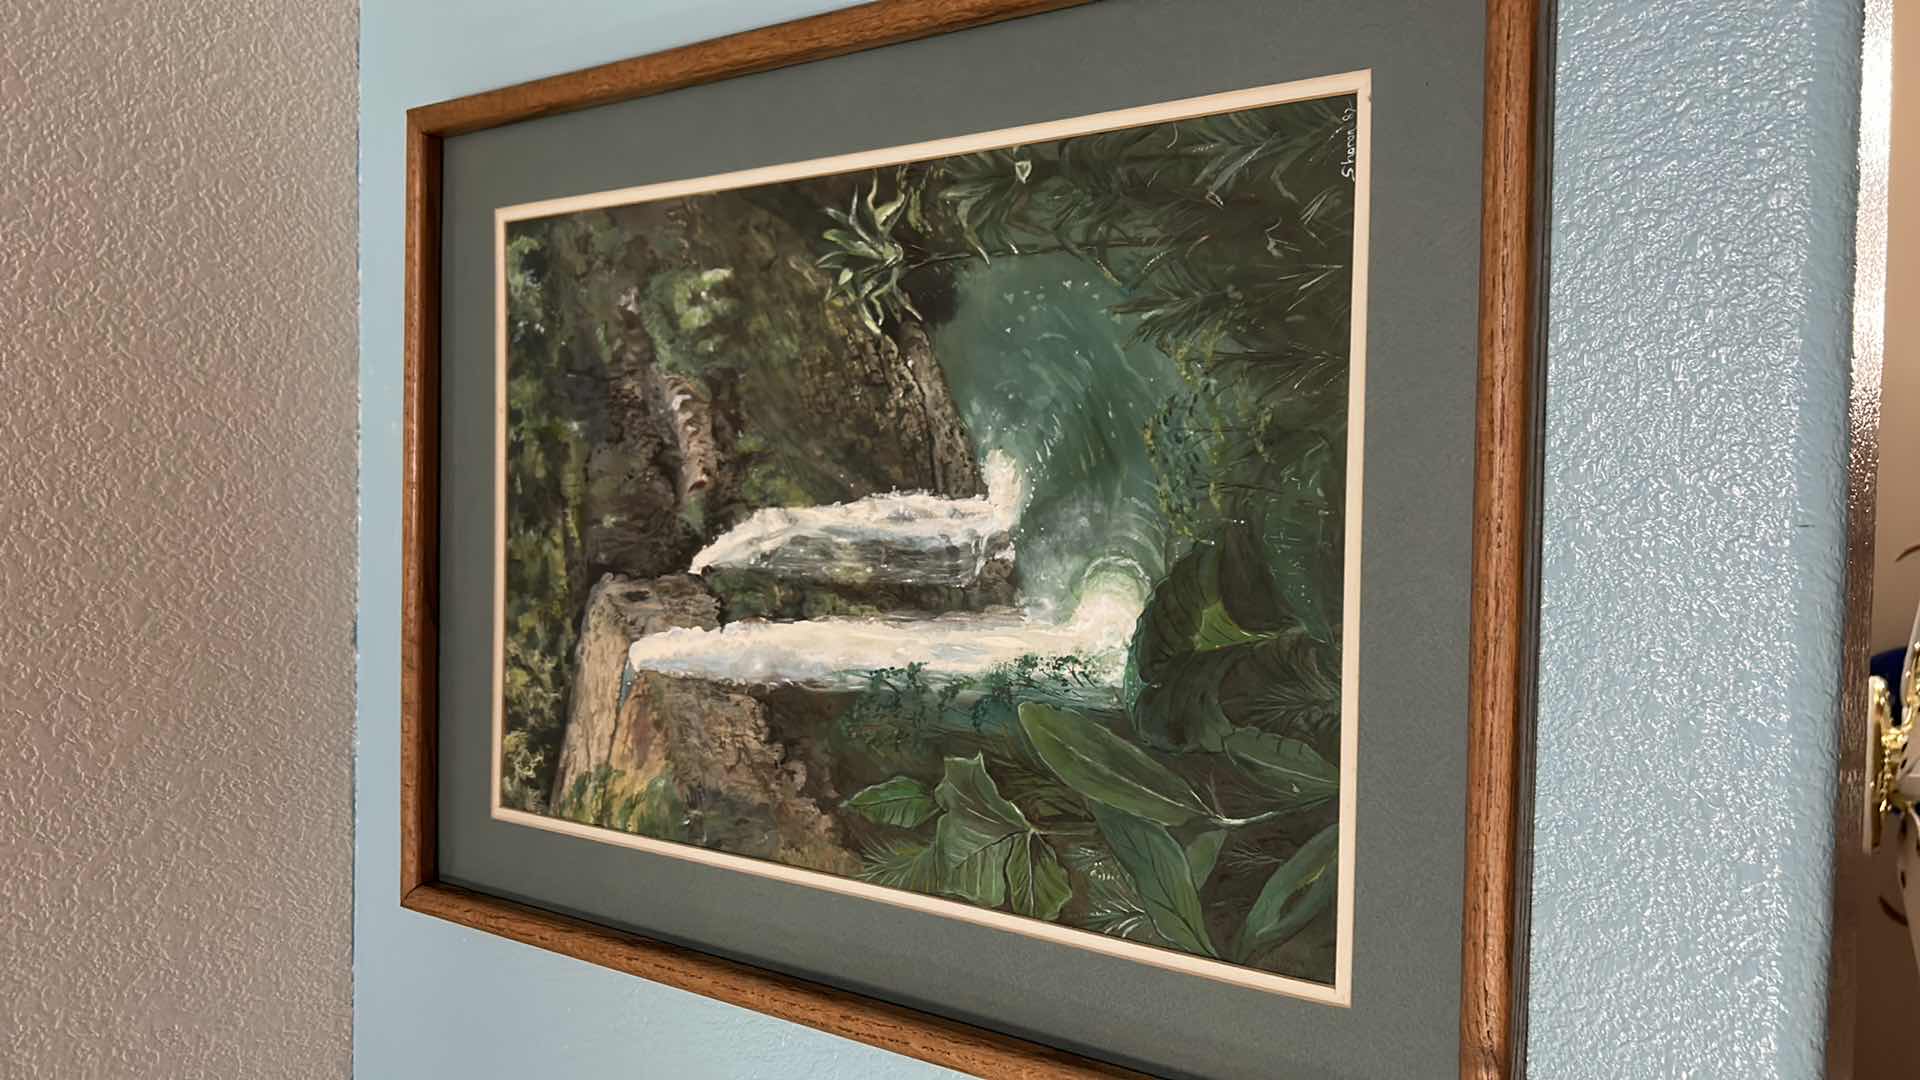 Photo 2 of ARTWORK, WOOD FRAMED TWIN FALLS PAINTING 21”
x 28”